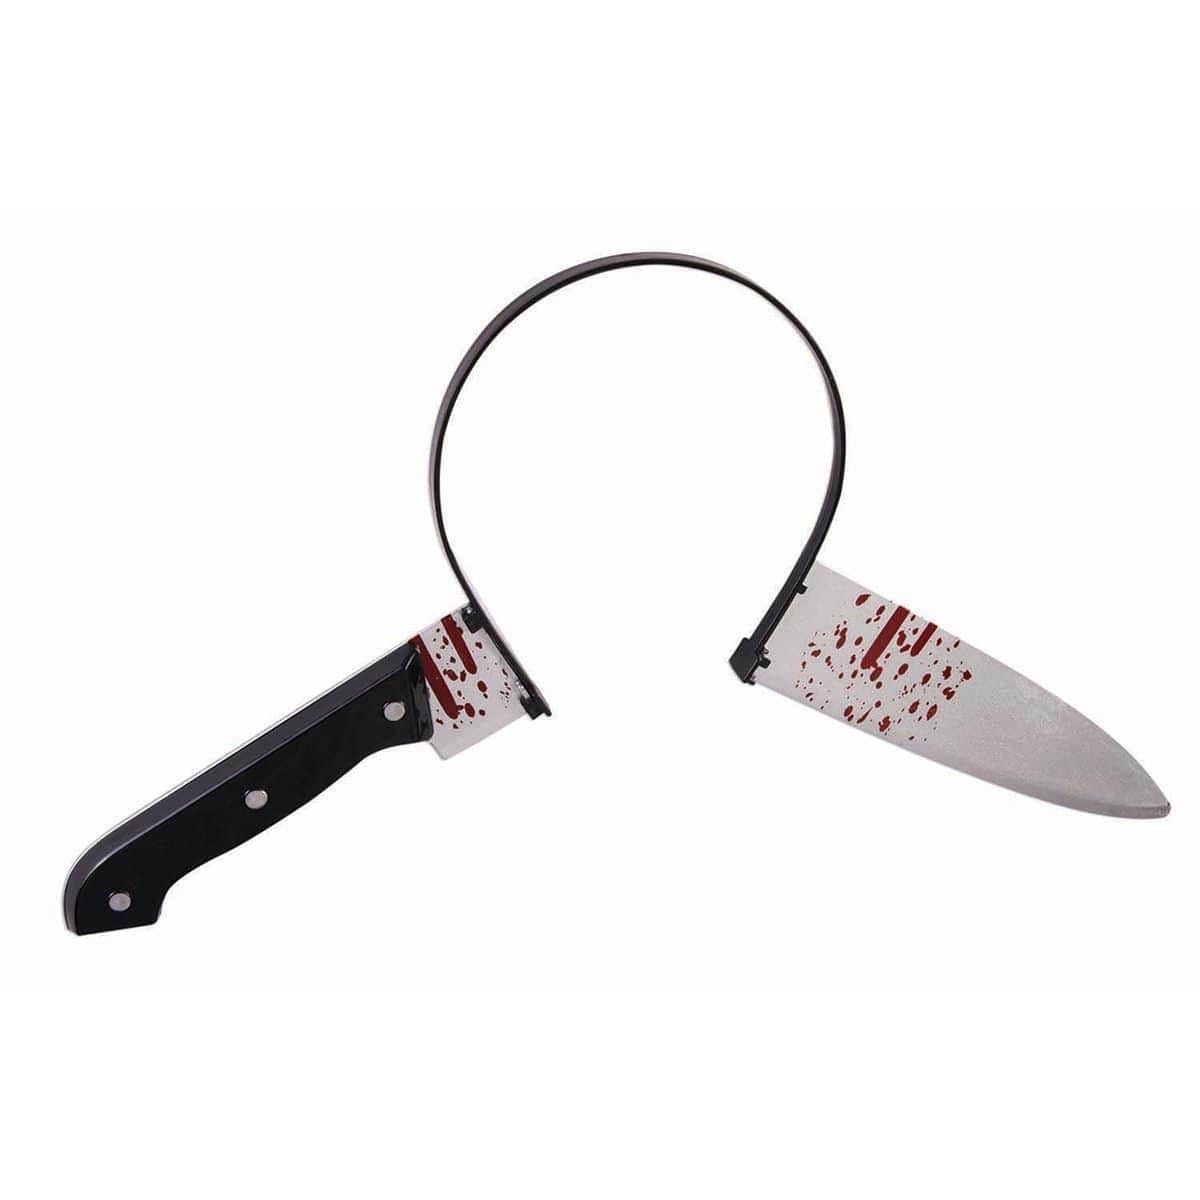 Buy Costume Accessories Bloody knife headband for adults sold at Party Expert